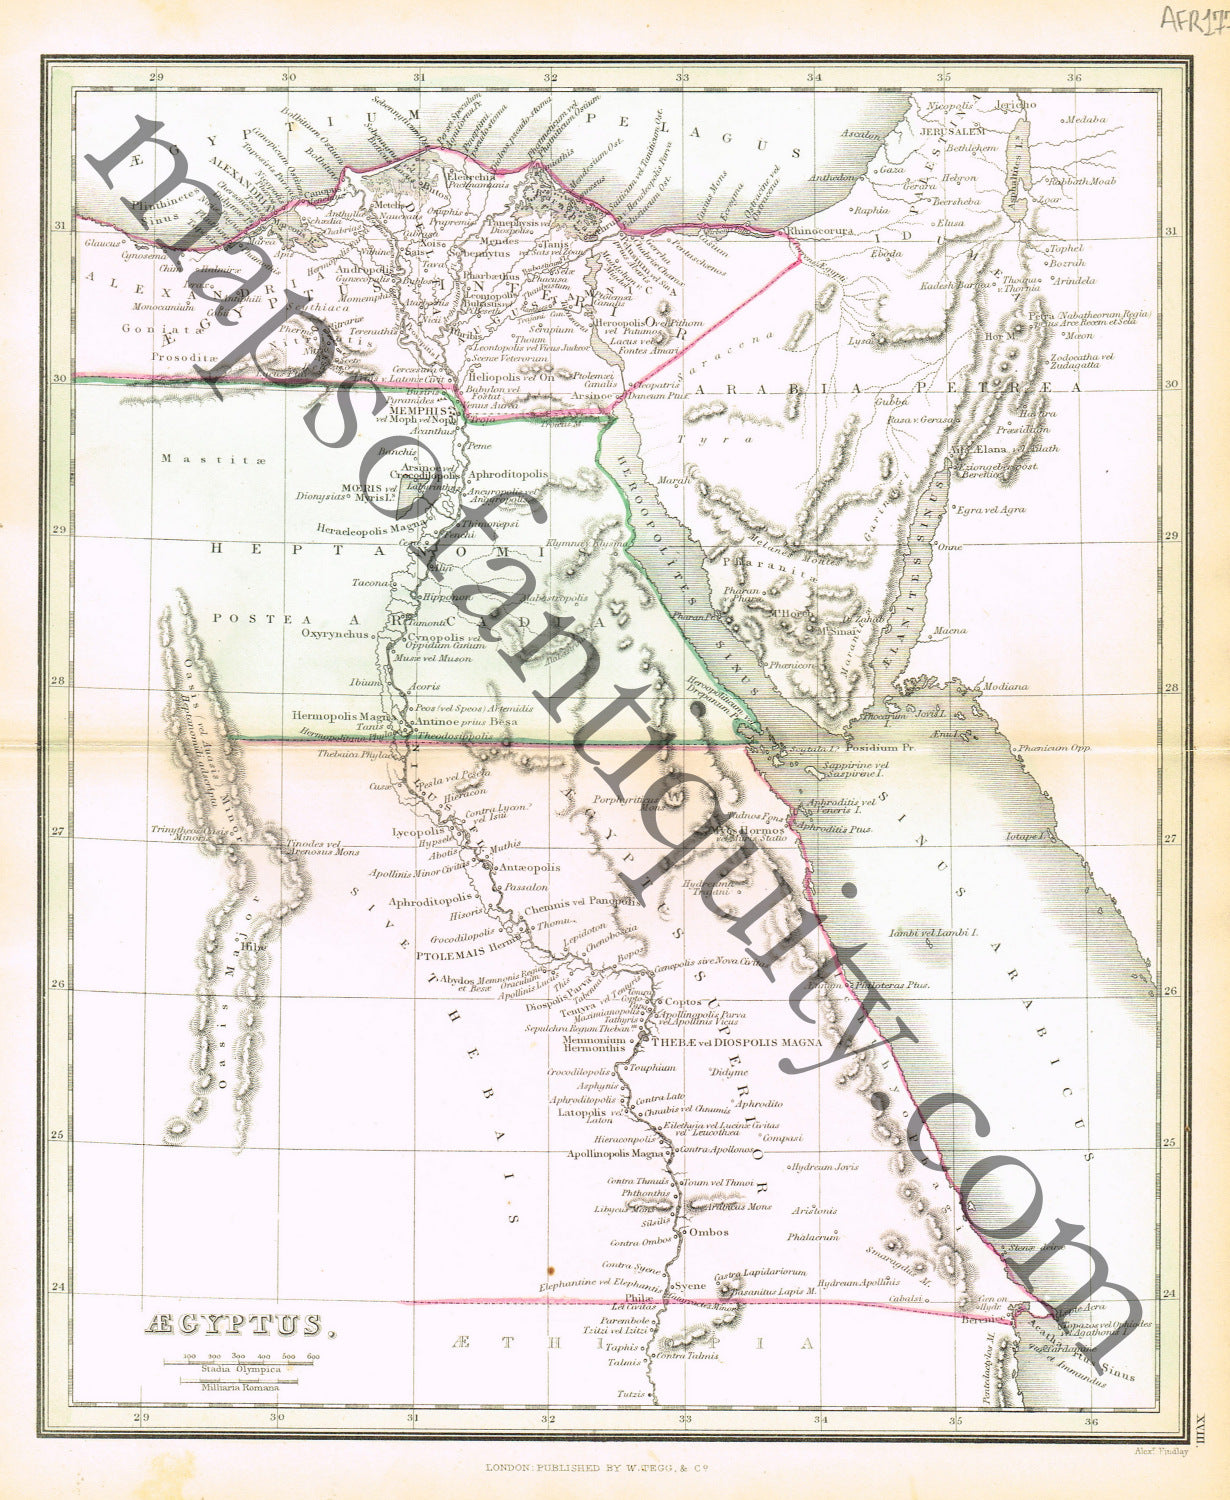 Antique-Hand-Colored-Map-Aegyptus-Africa-Ancient-World-Egypt-1840-Findlay-Maps-Of-Antiquity